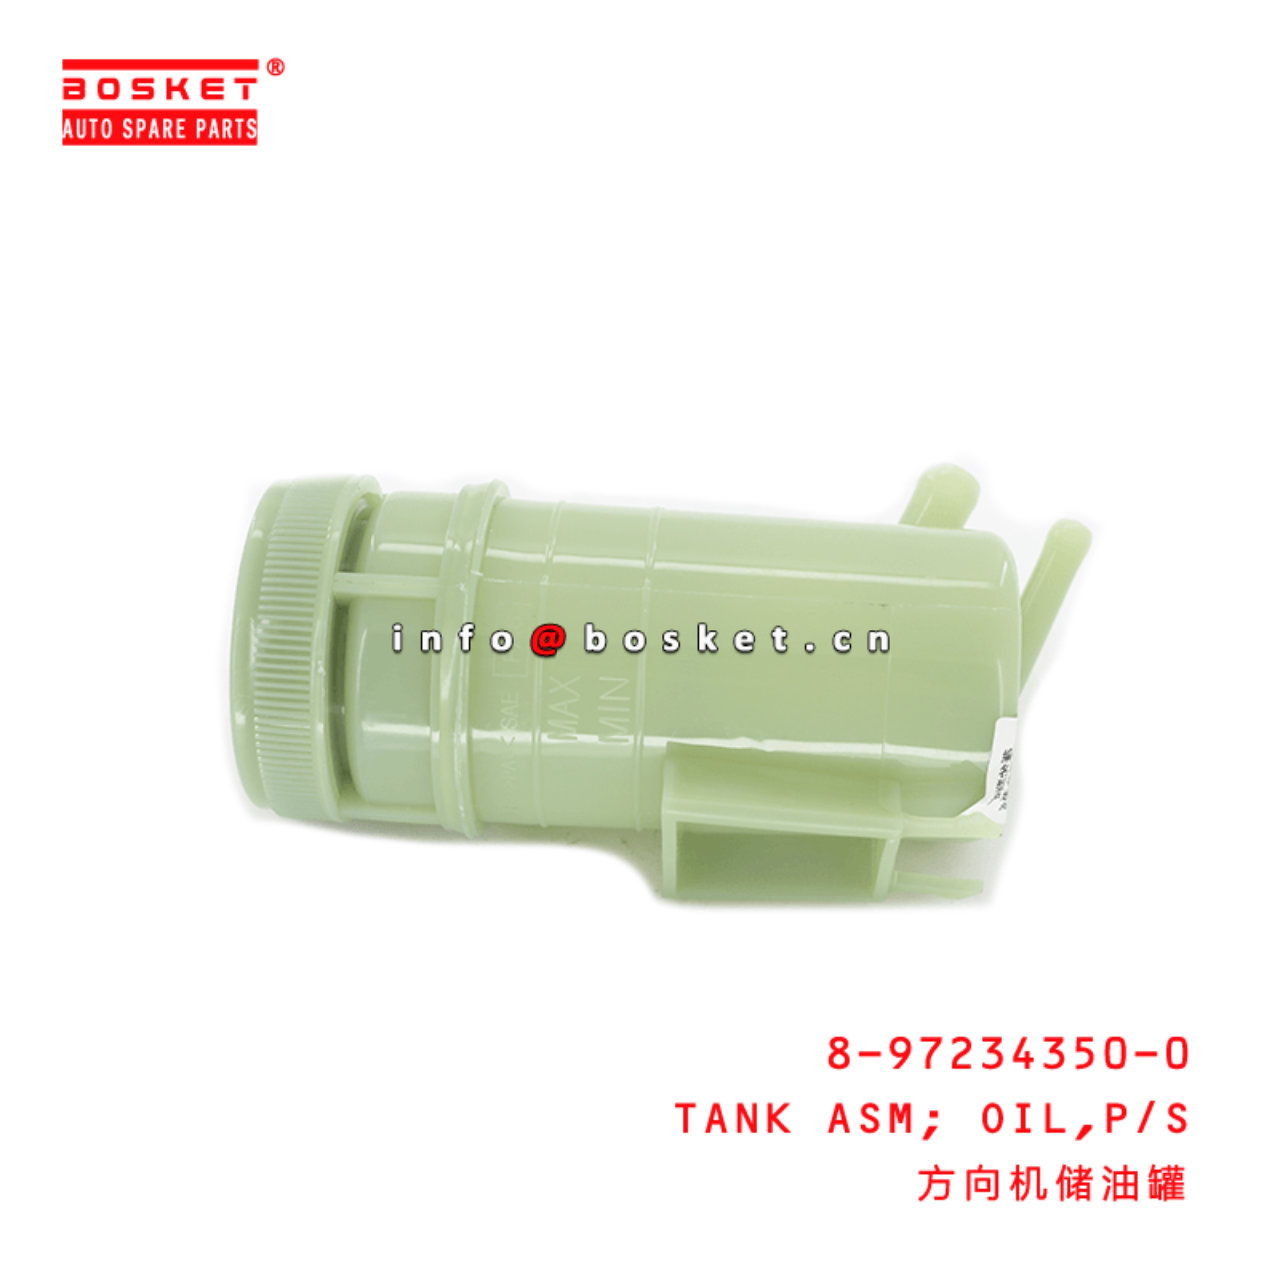 8-97234350-0 Power Steering Oil Tank Assembly Suitable for ISUZU D-MAX 8972343500